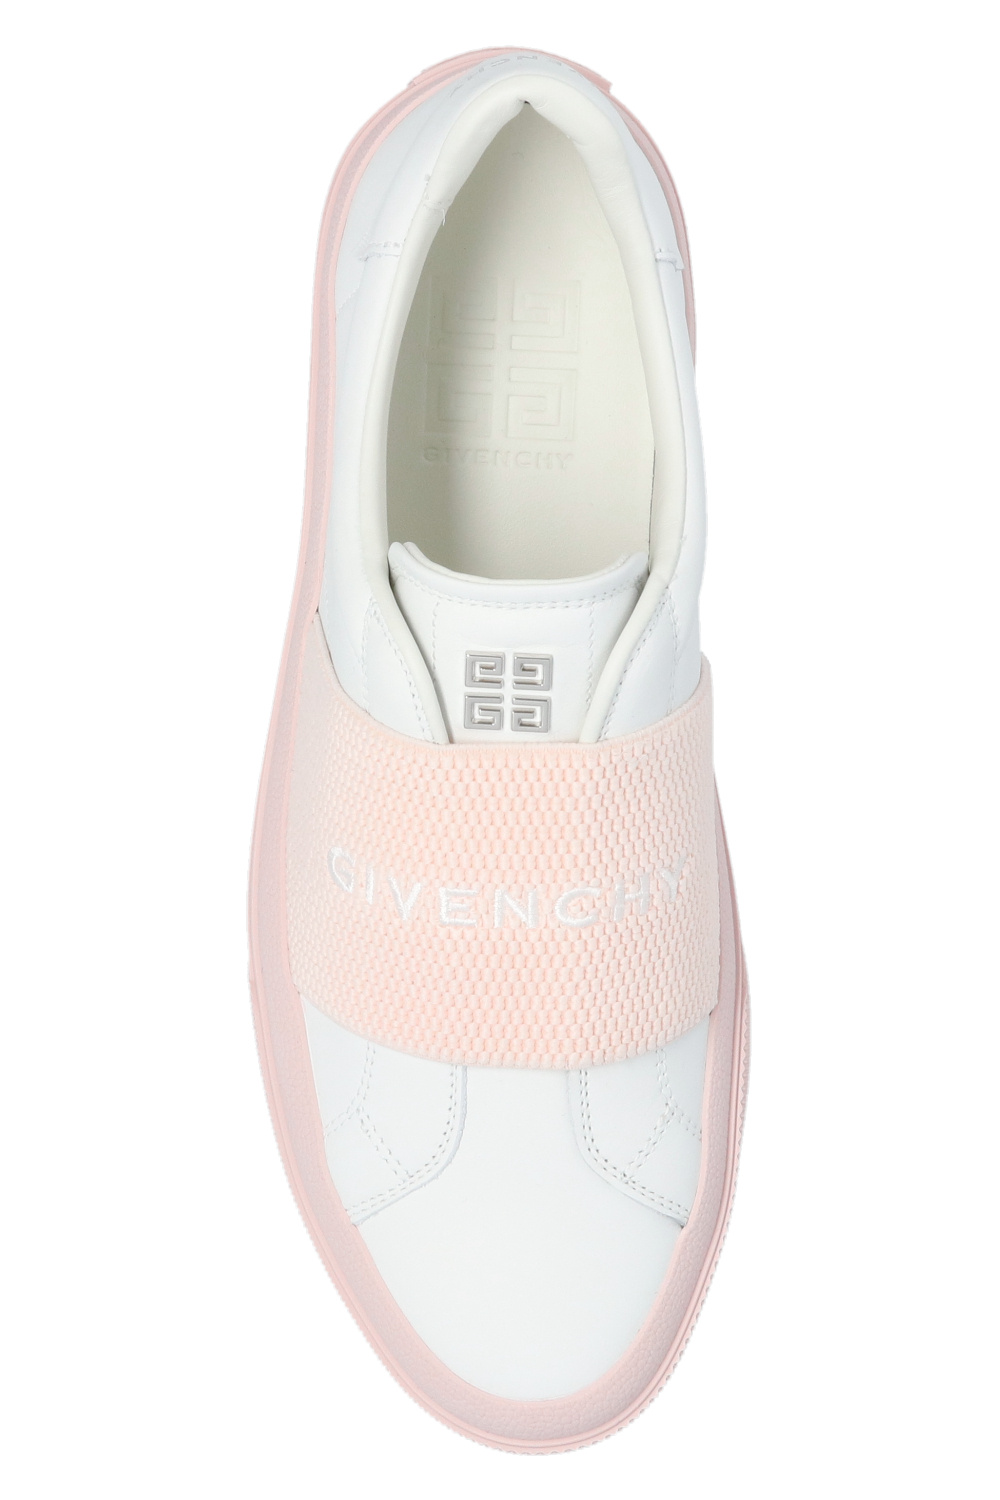 Givenchy 'New City' shoes | Women's Shoes | Vitkac